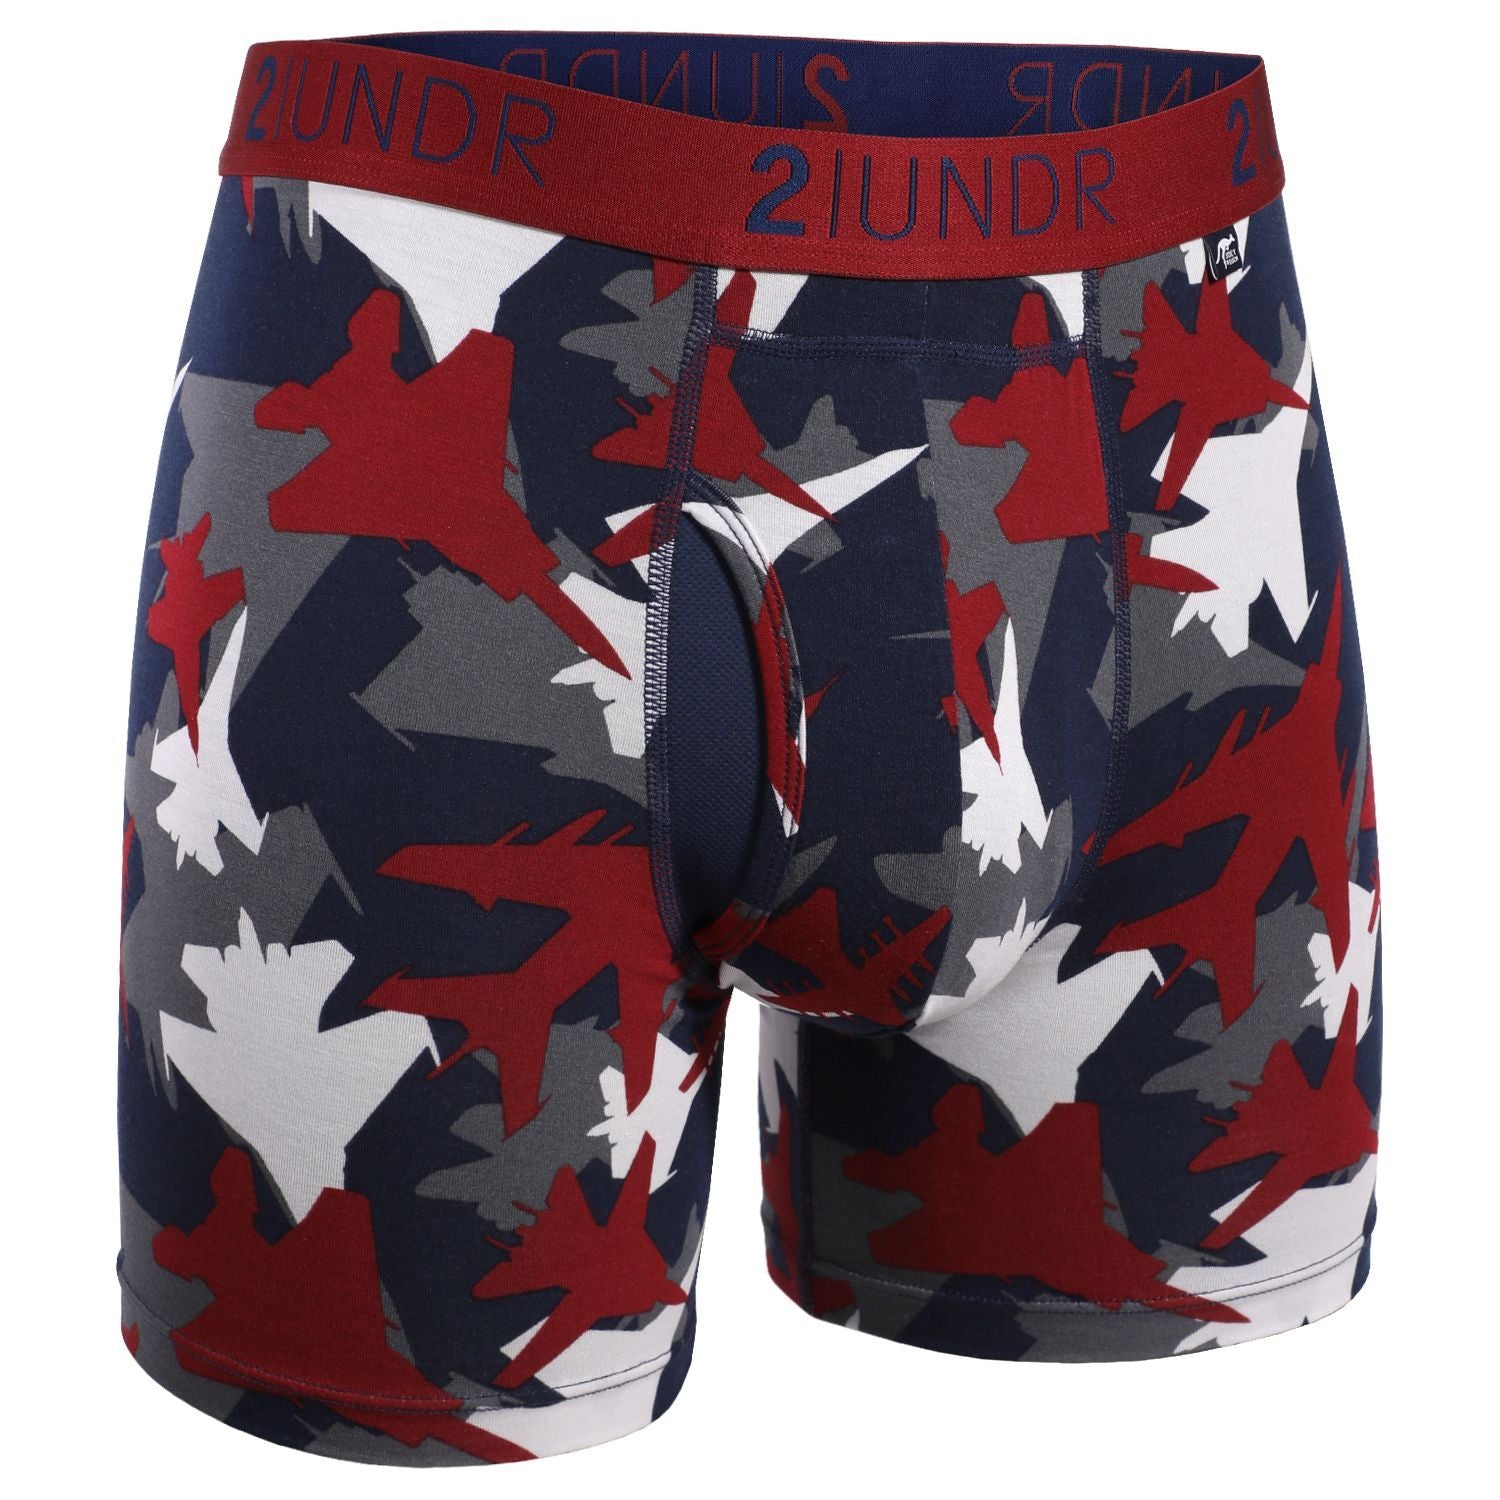 2UNDR - Printed Swing Shift Boxer Brief - Flower Power